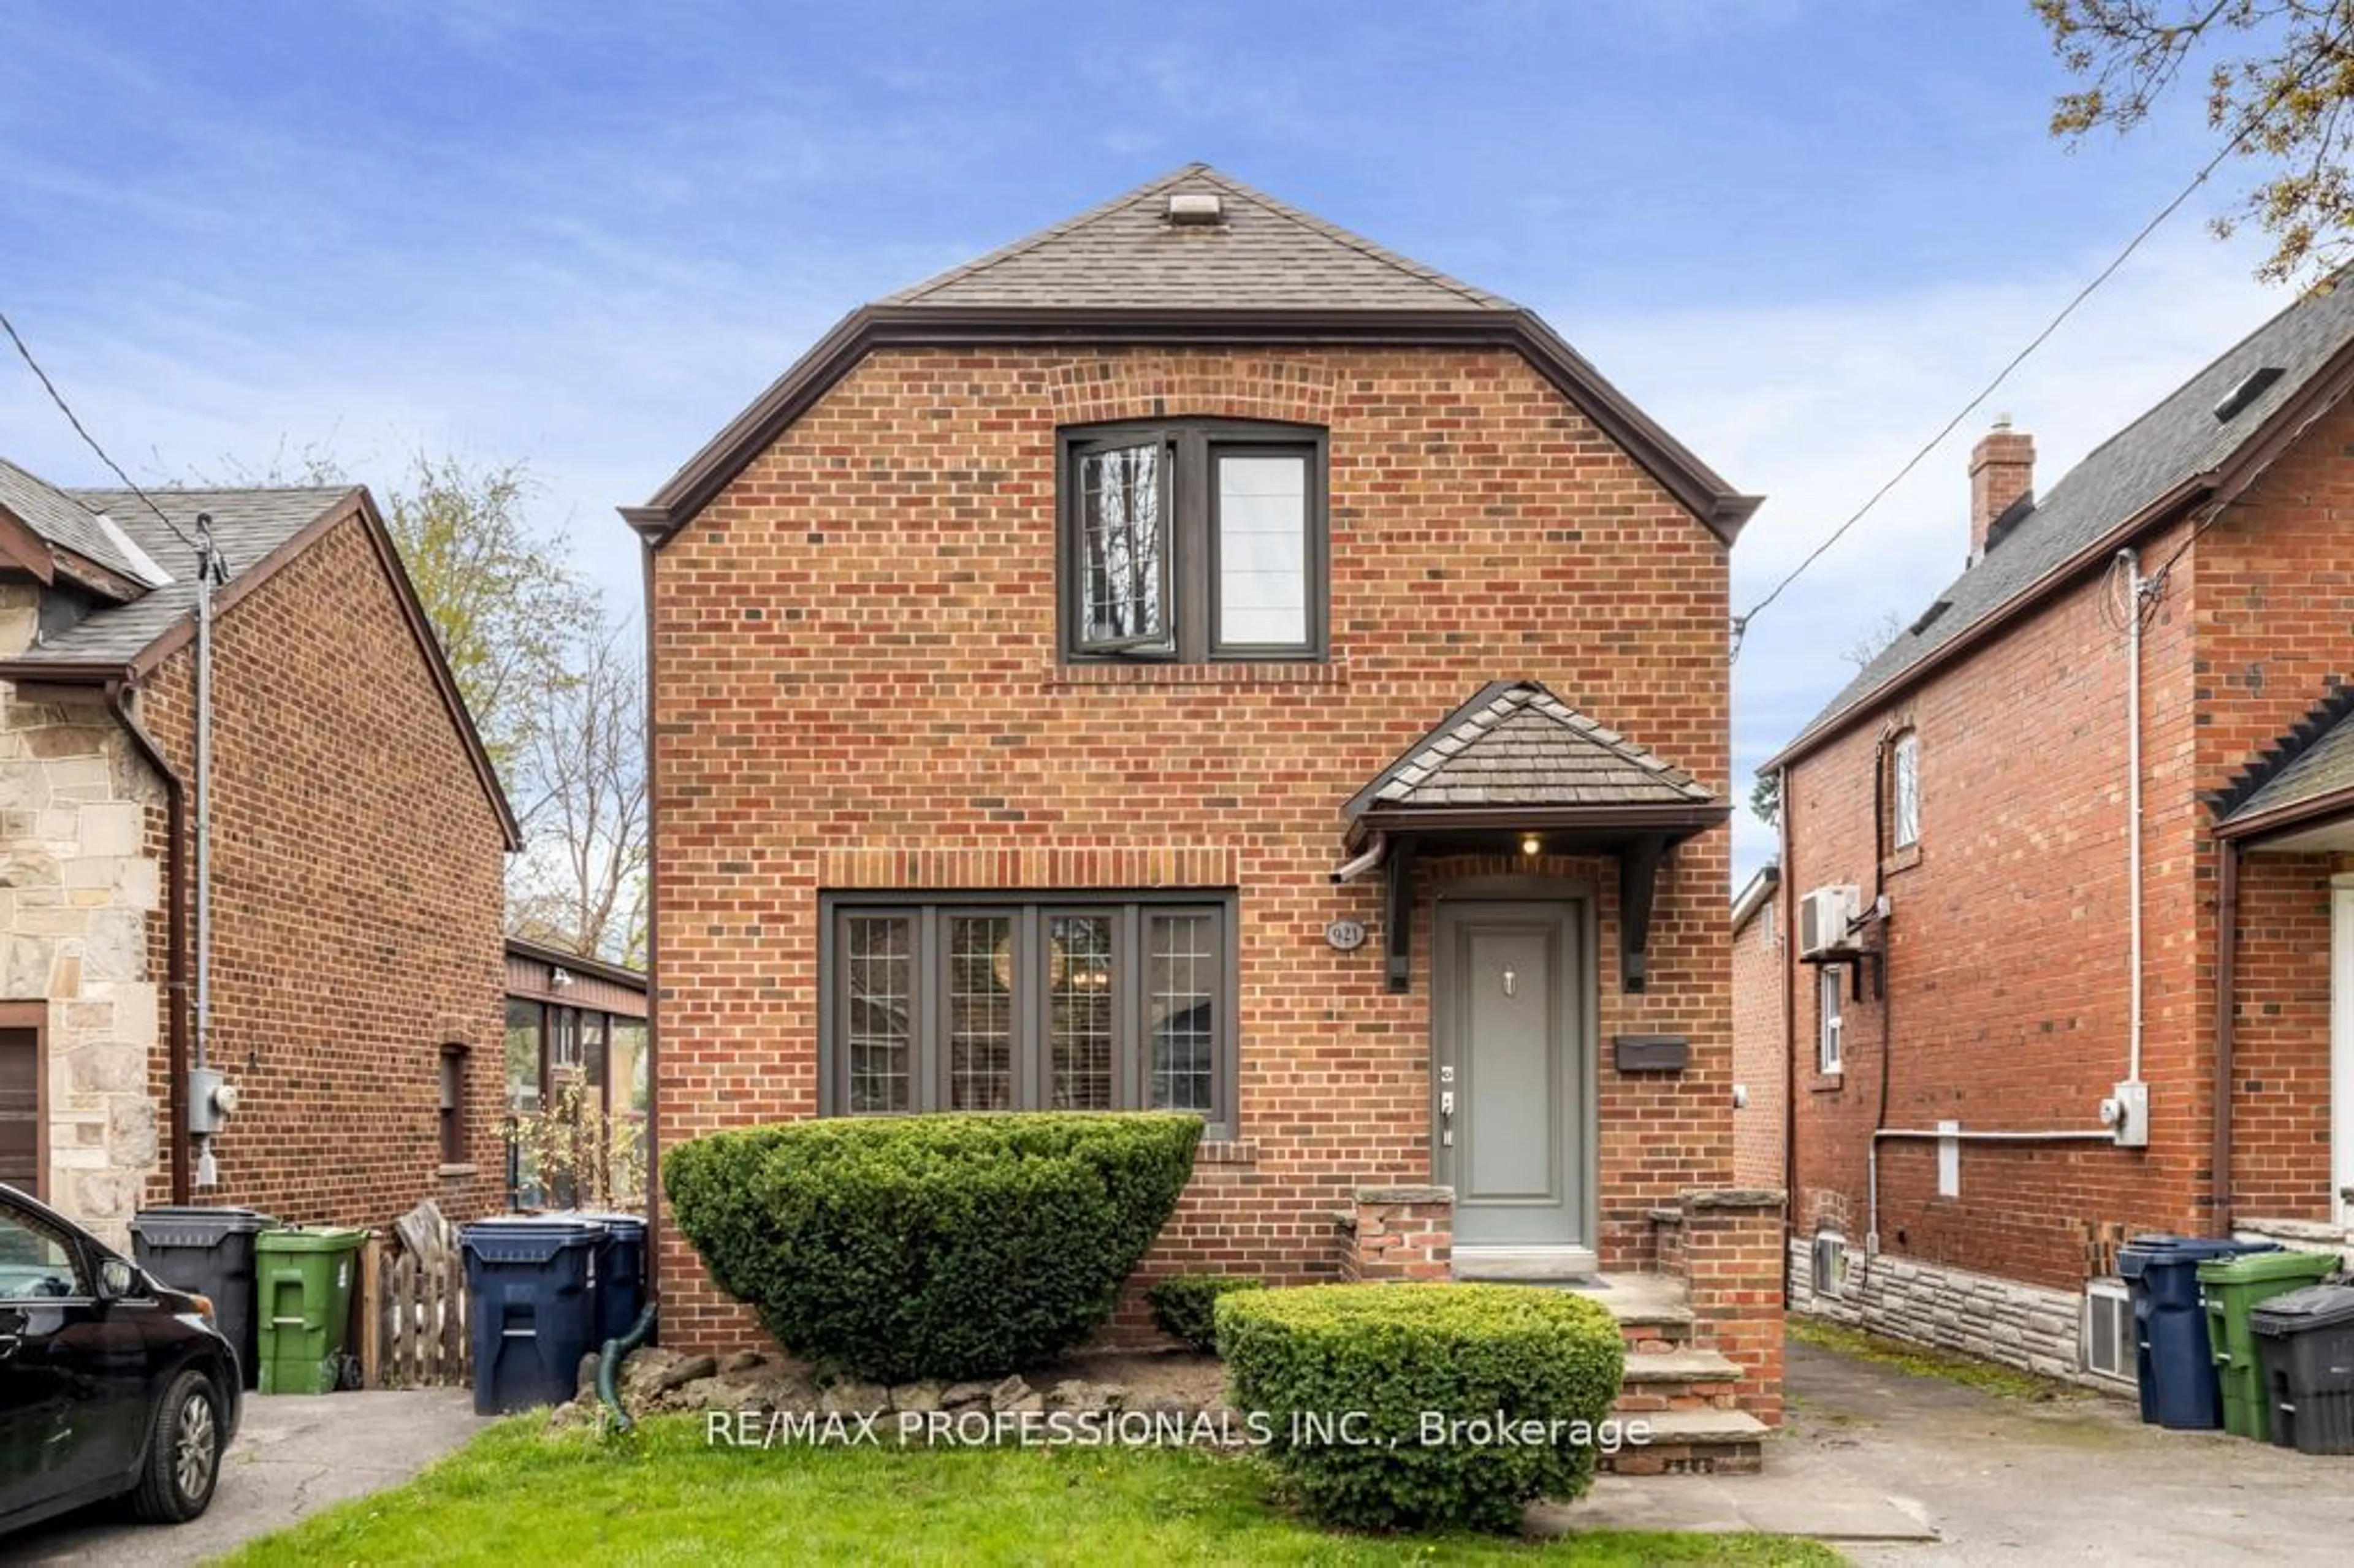 Home with brick exterior material for 921 Royal York Rd, Toronto Ontario M8Y 2V8